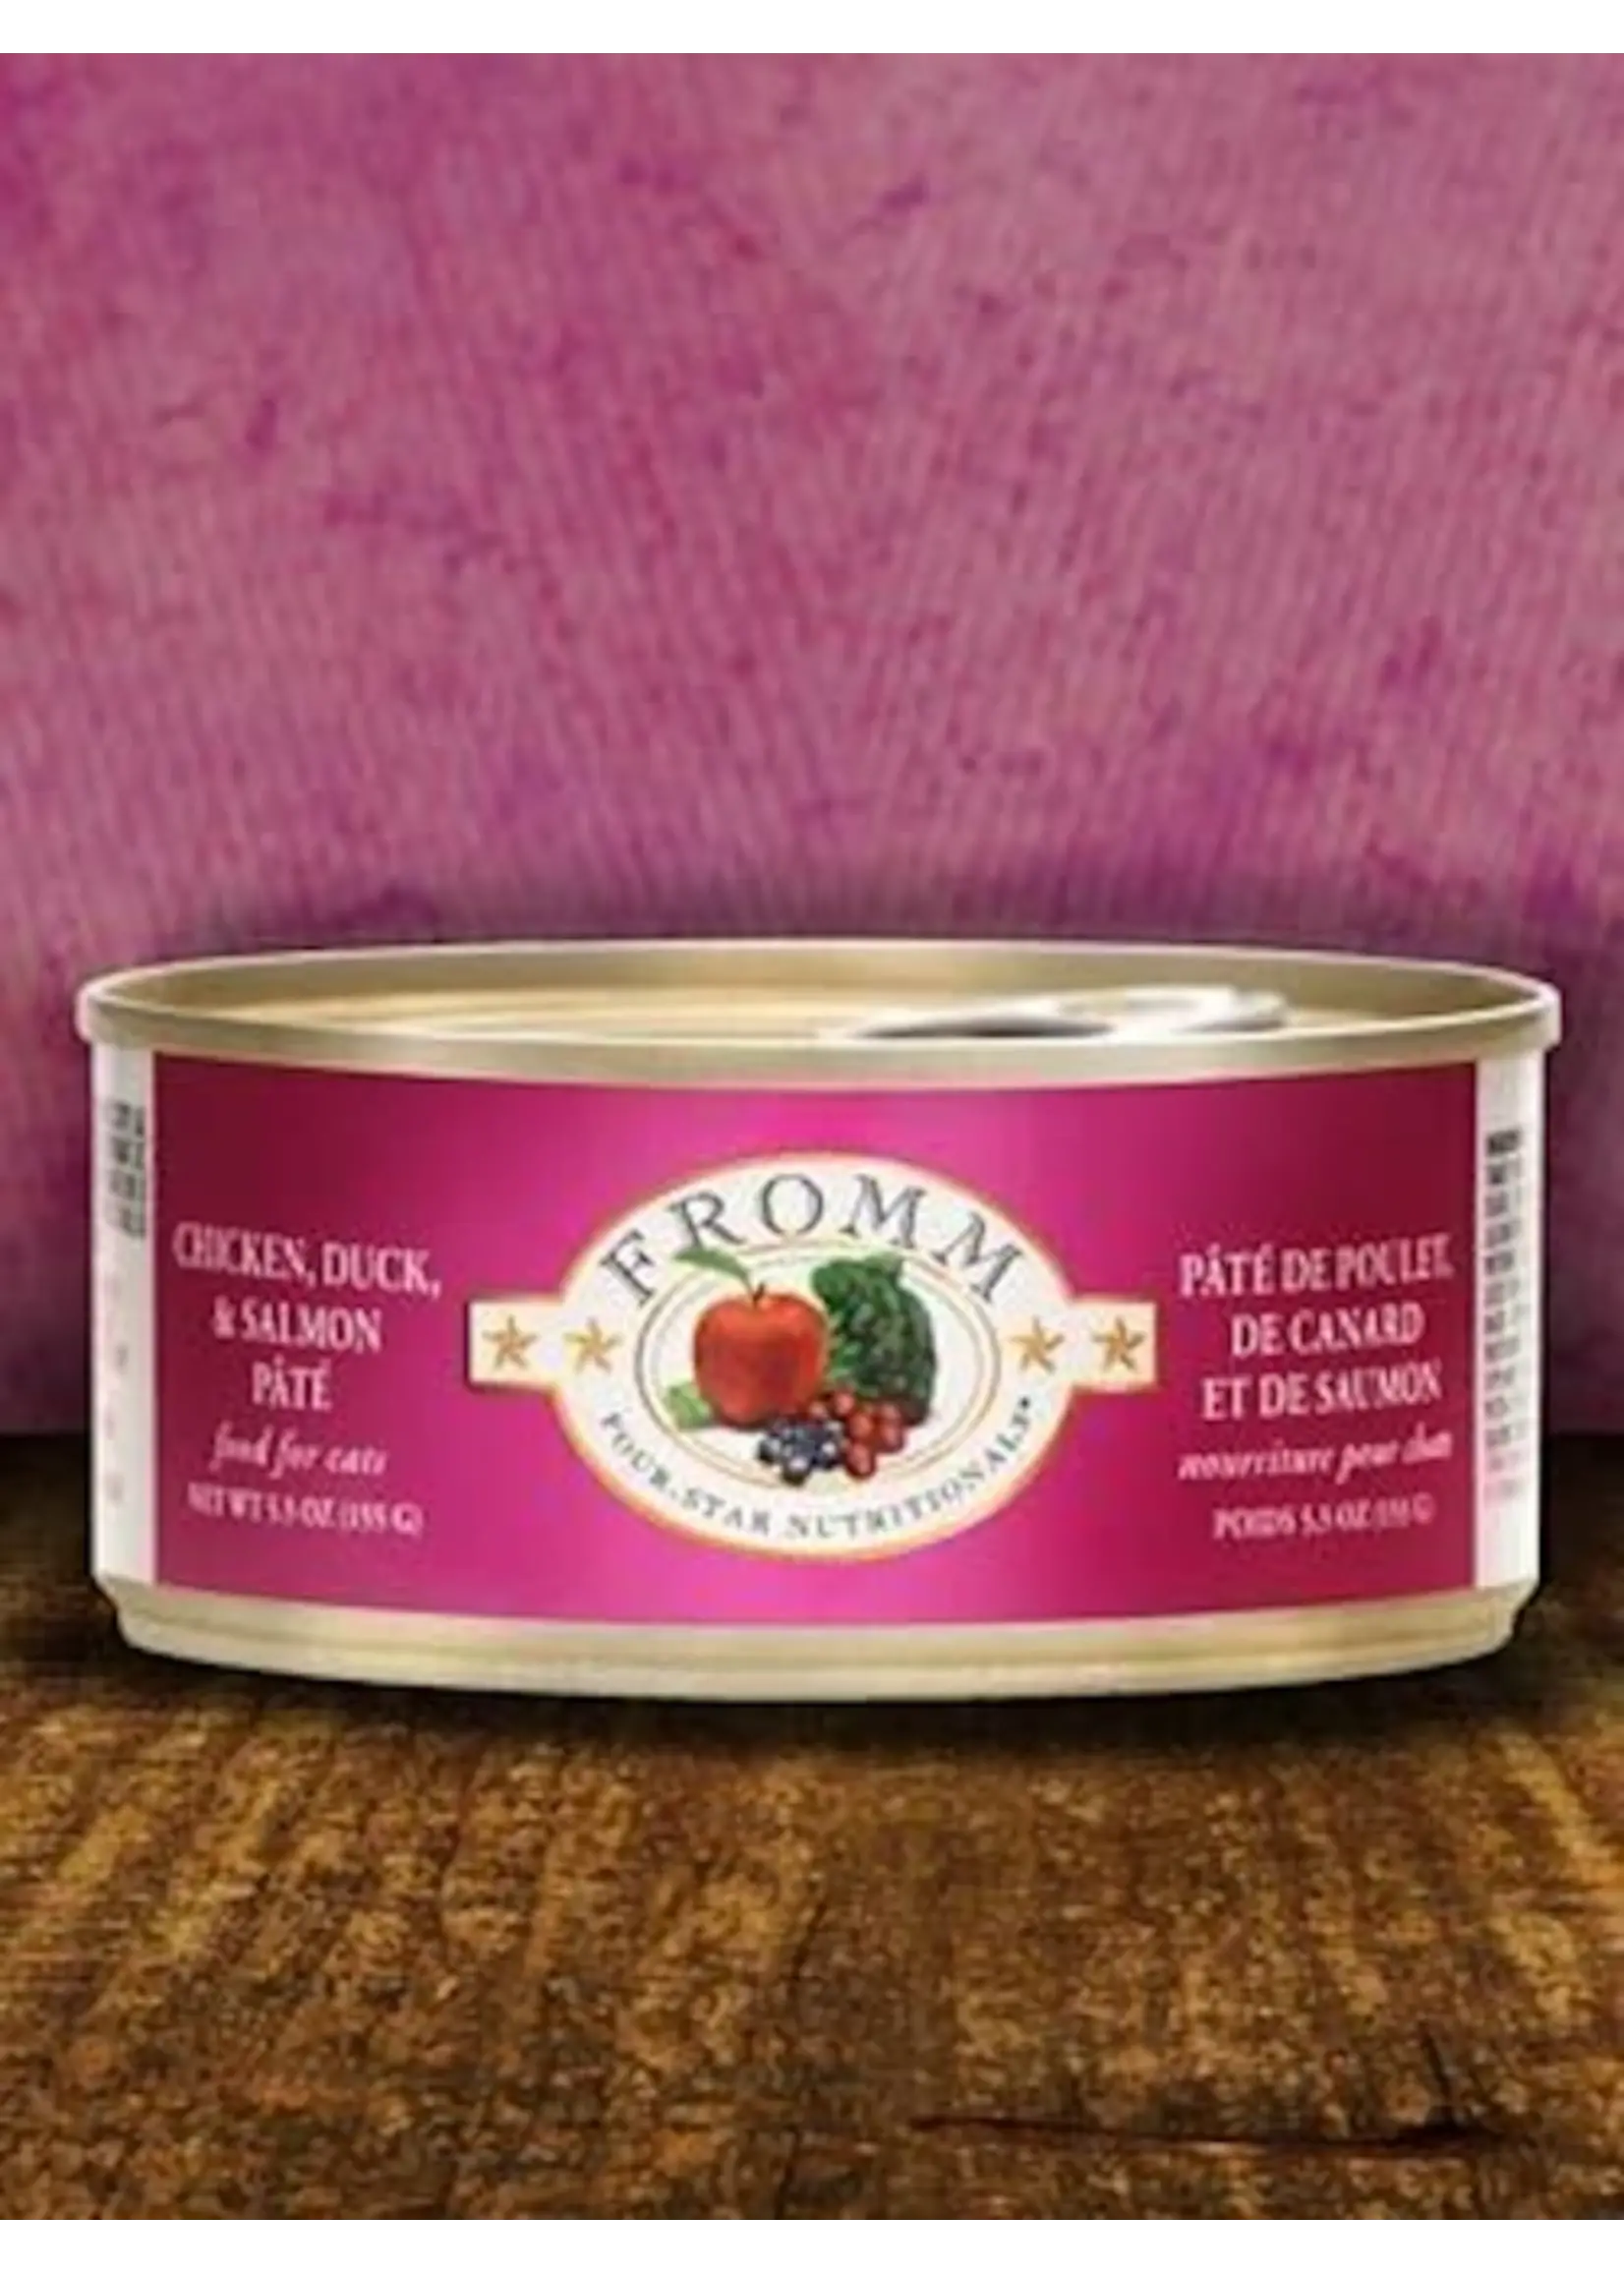 Fromm Fromm Cat Chicken, Duck, and Salmon Pate 5.5oz Can